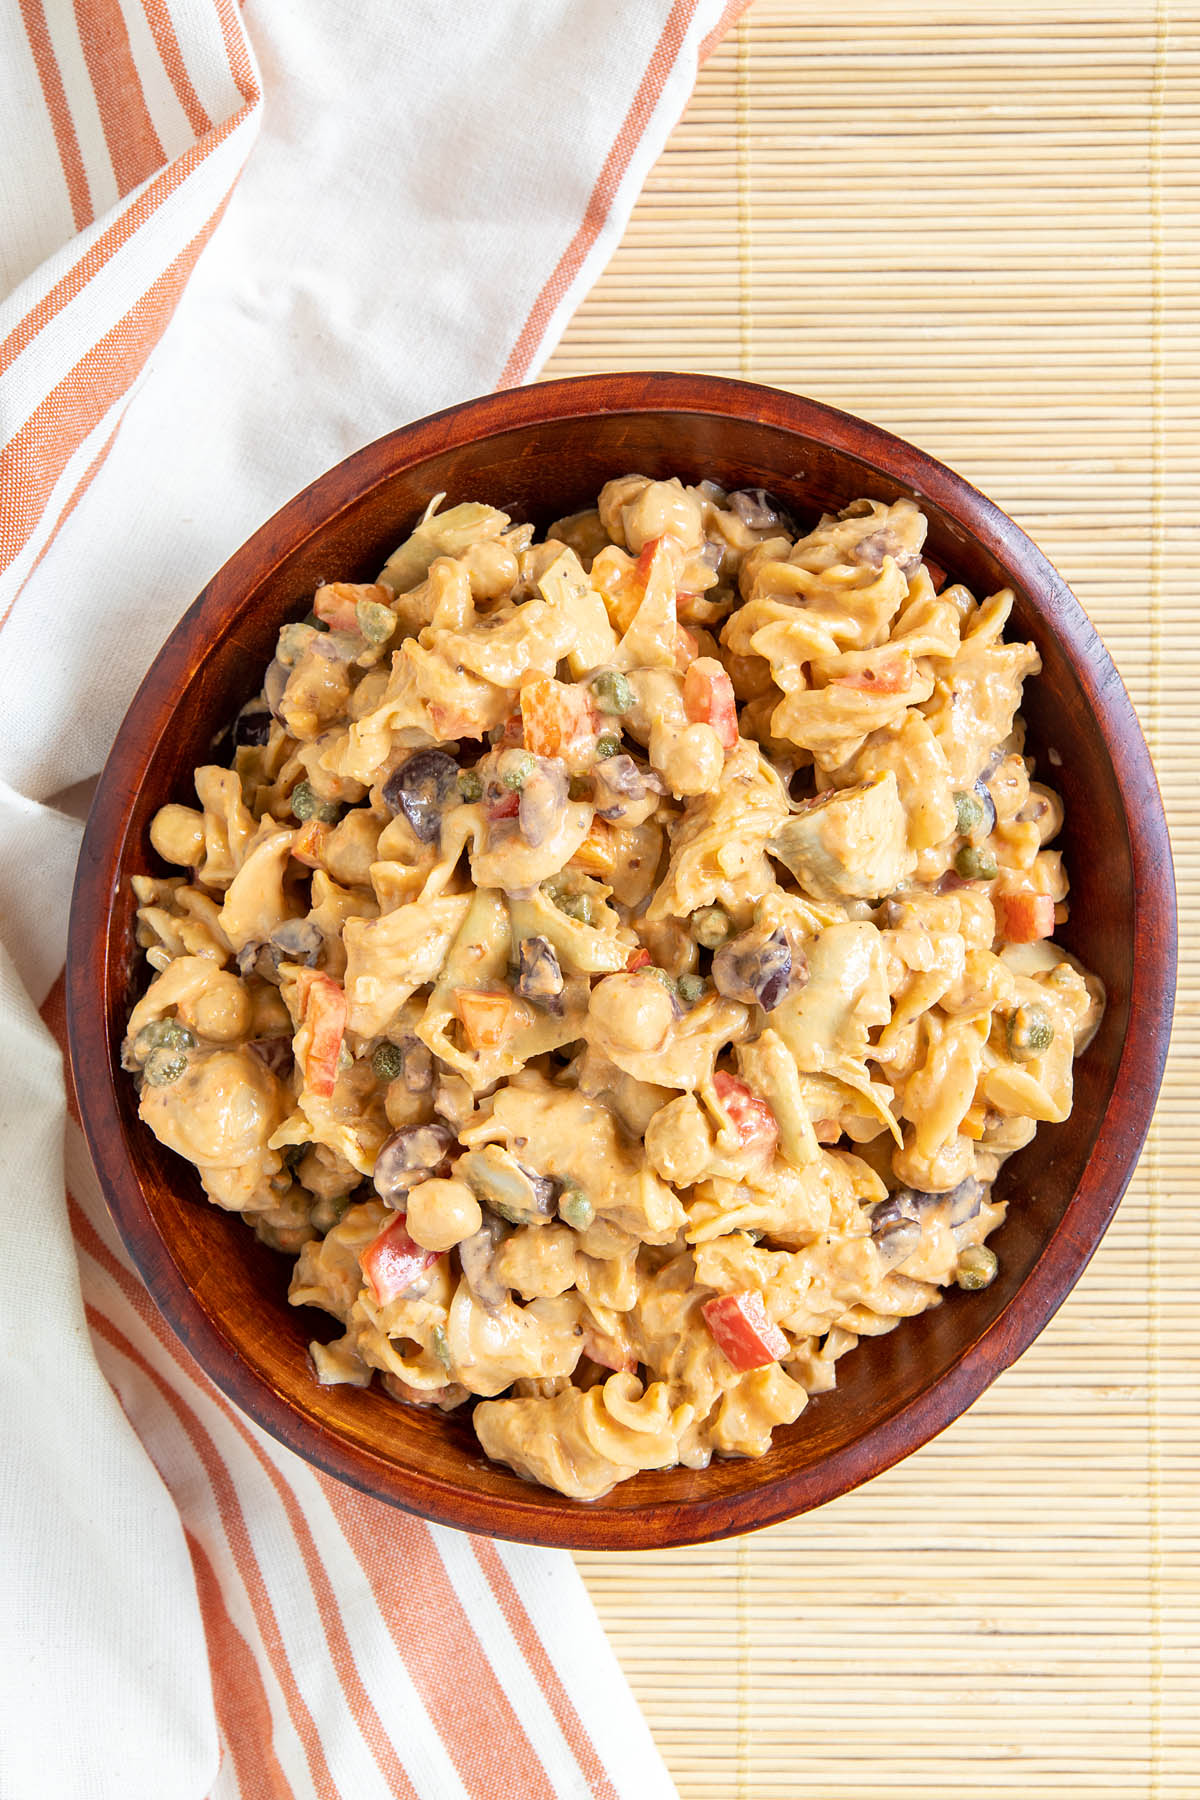 Red Lentil Pasta Salad with Chickpeas in a wood bowl.